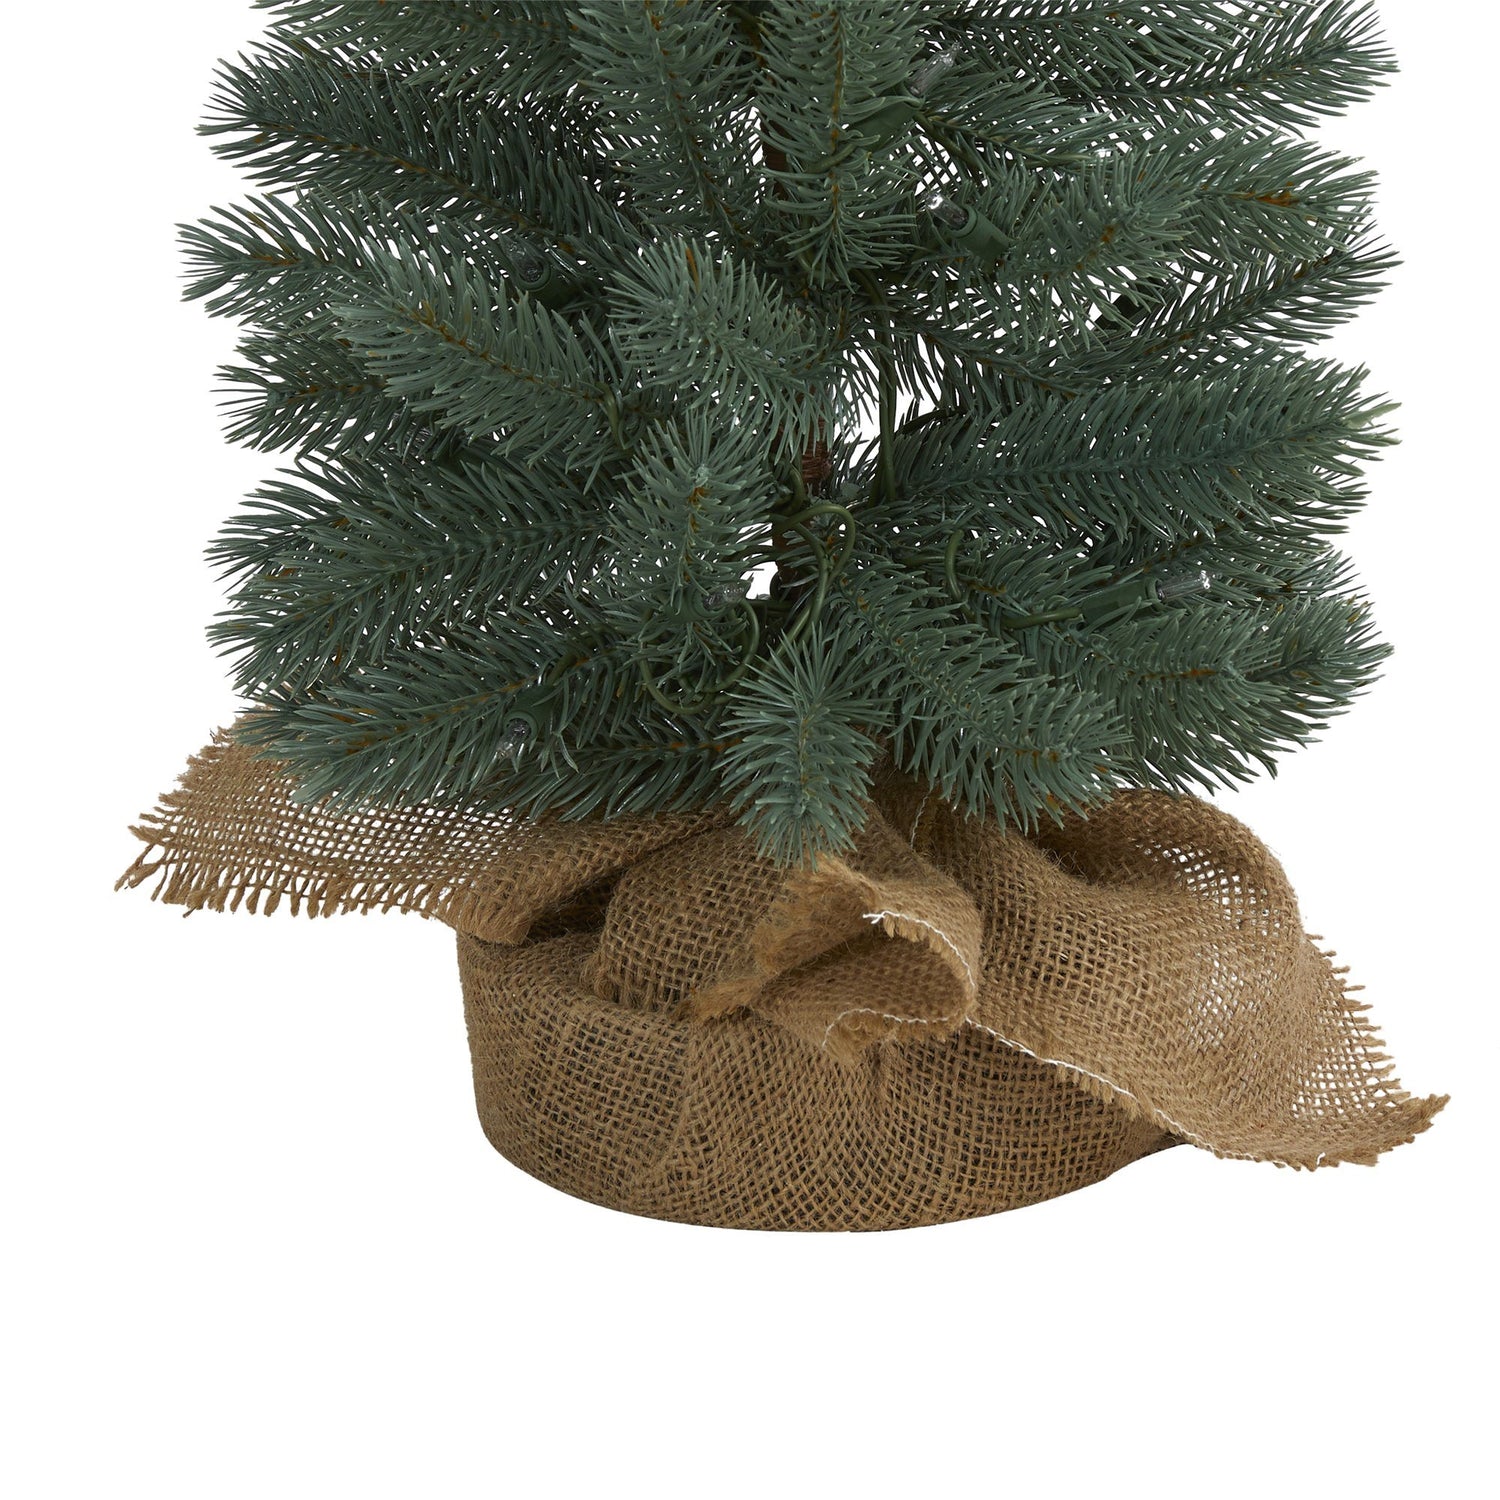 4’ Green Pine Artificial Christmas Tree with 70 Warm White Lights Set in a Burlap Base